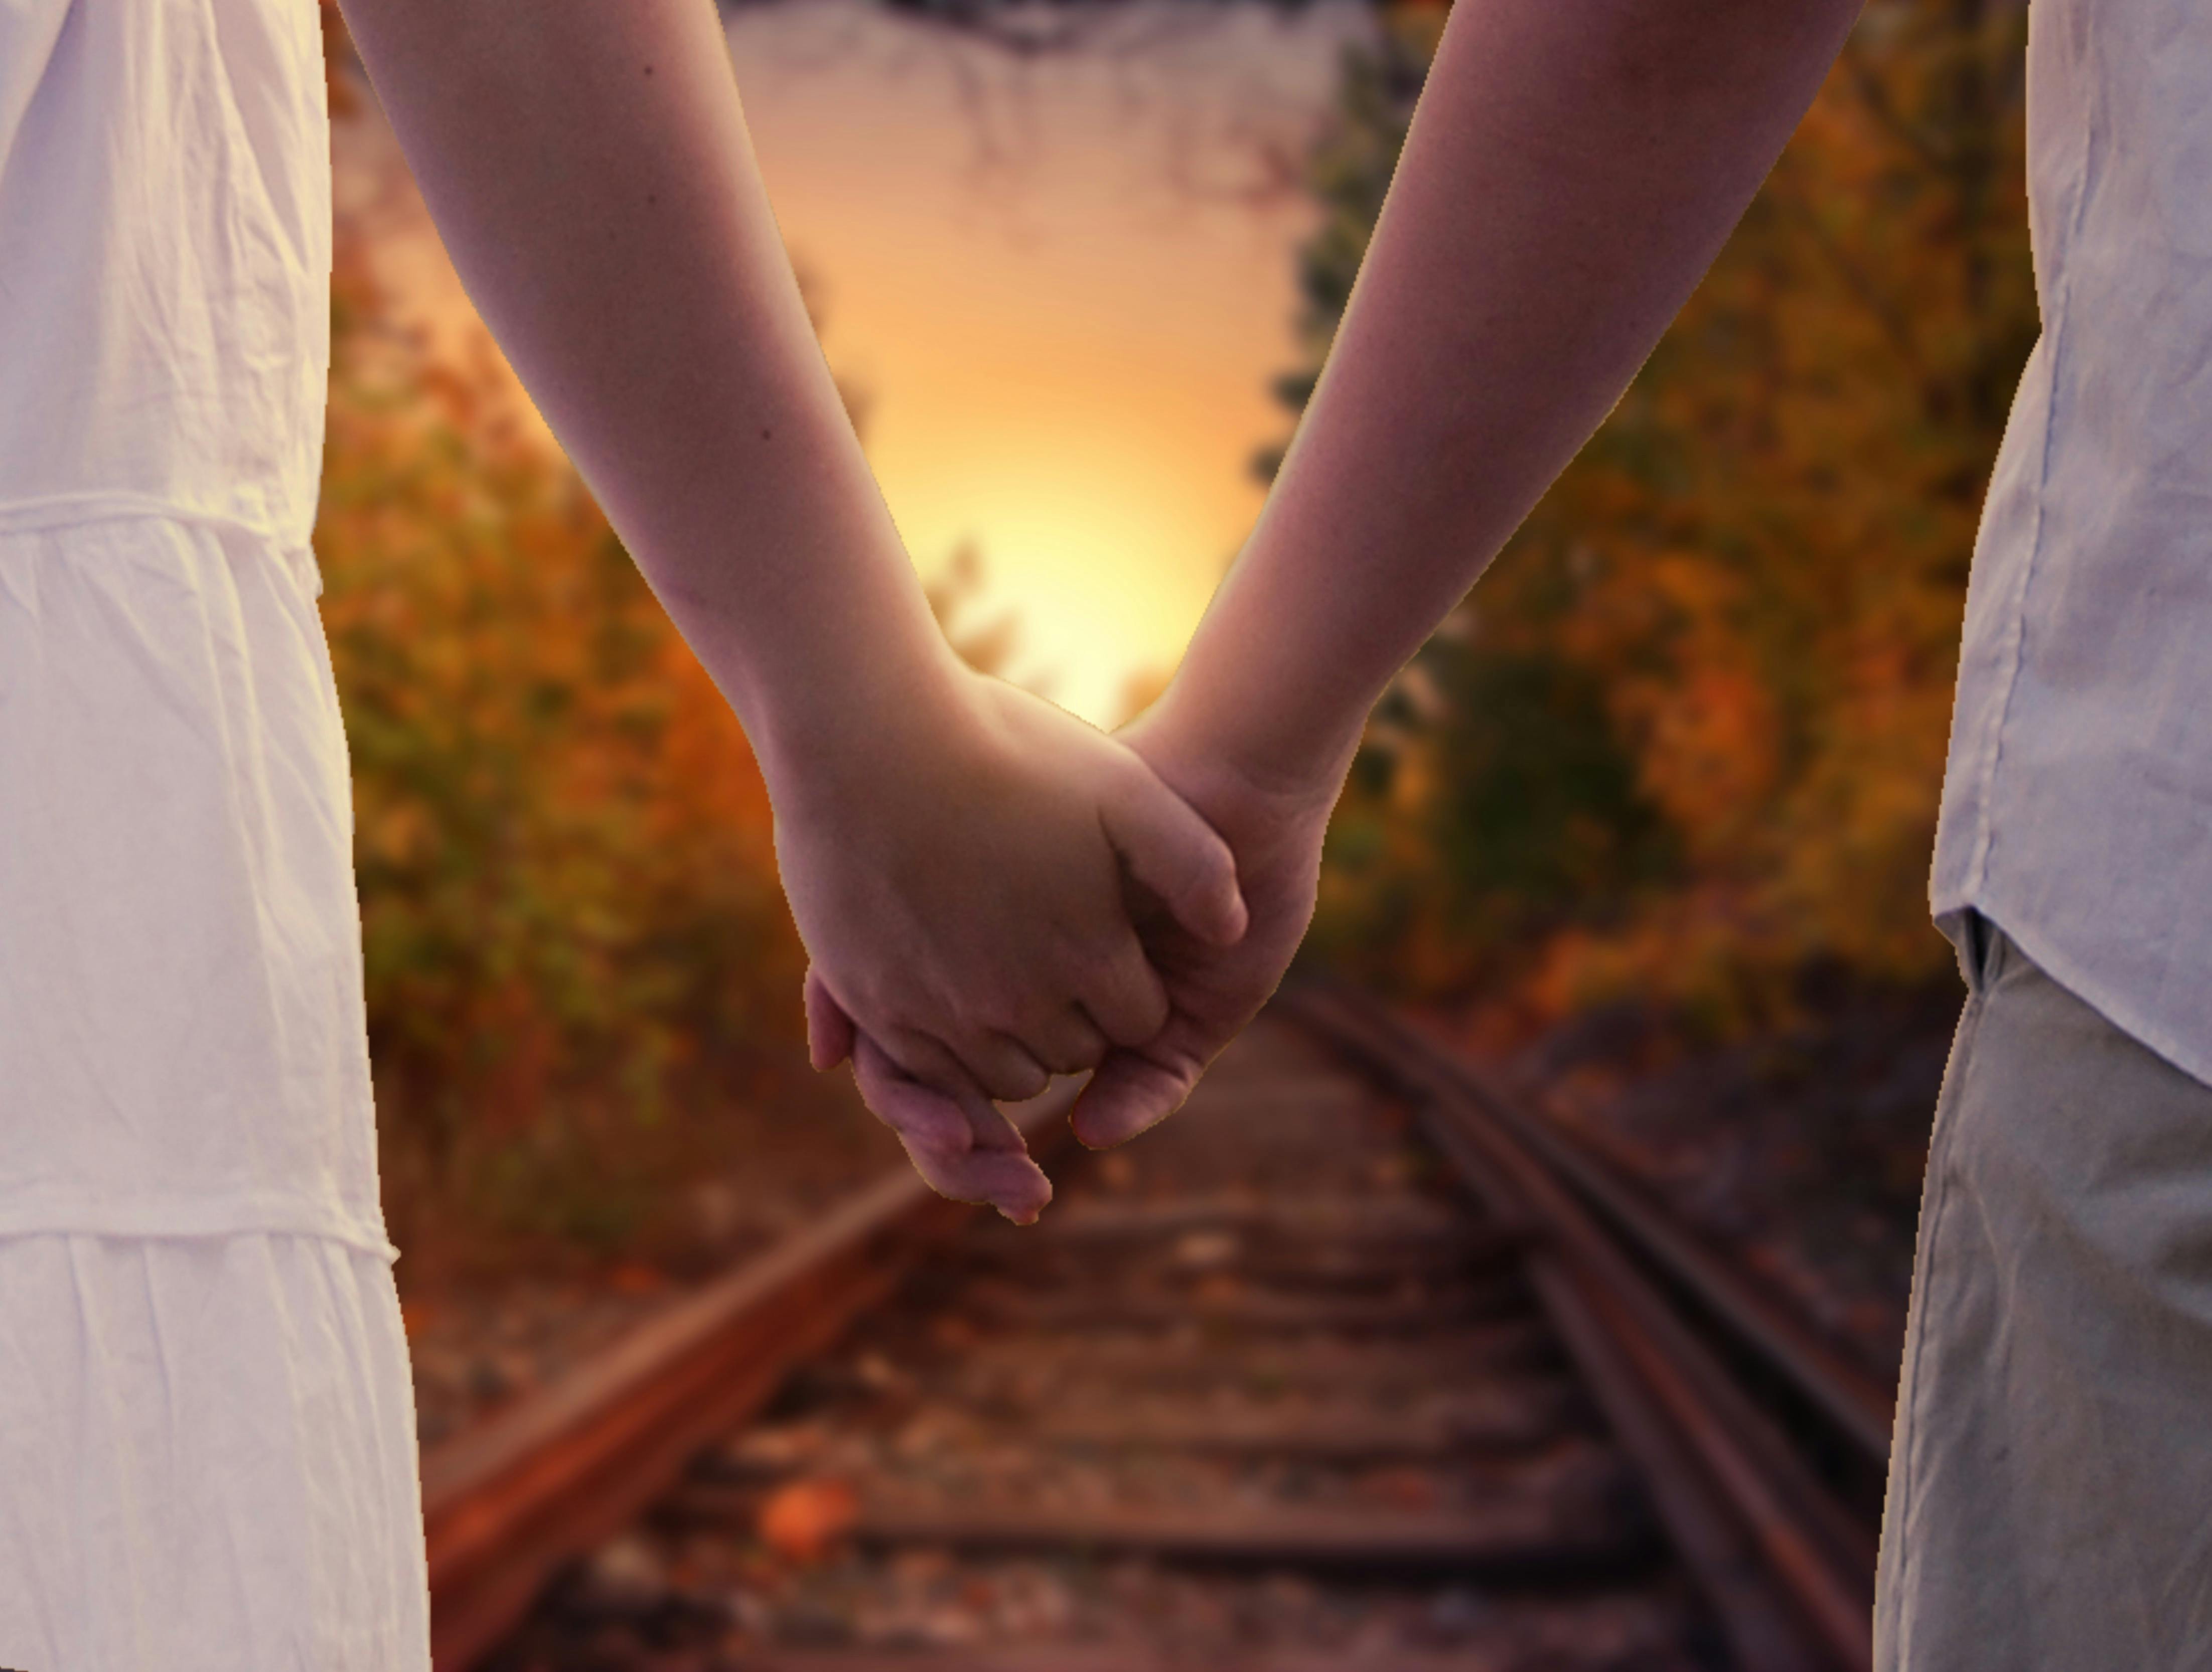 1000 Great Holding Hands Photos · Pexels · Free Stock Photos